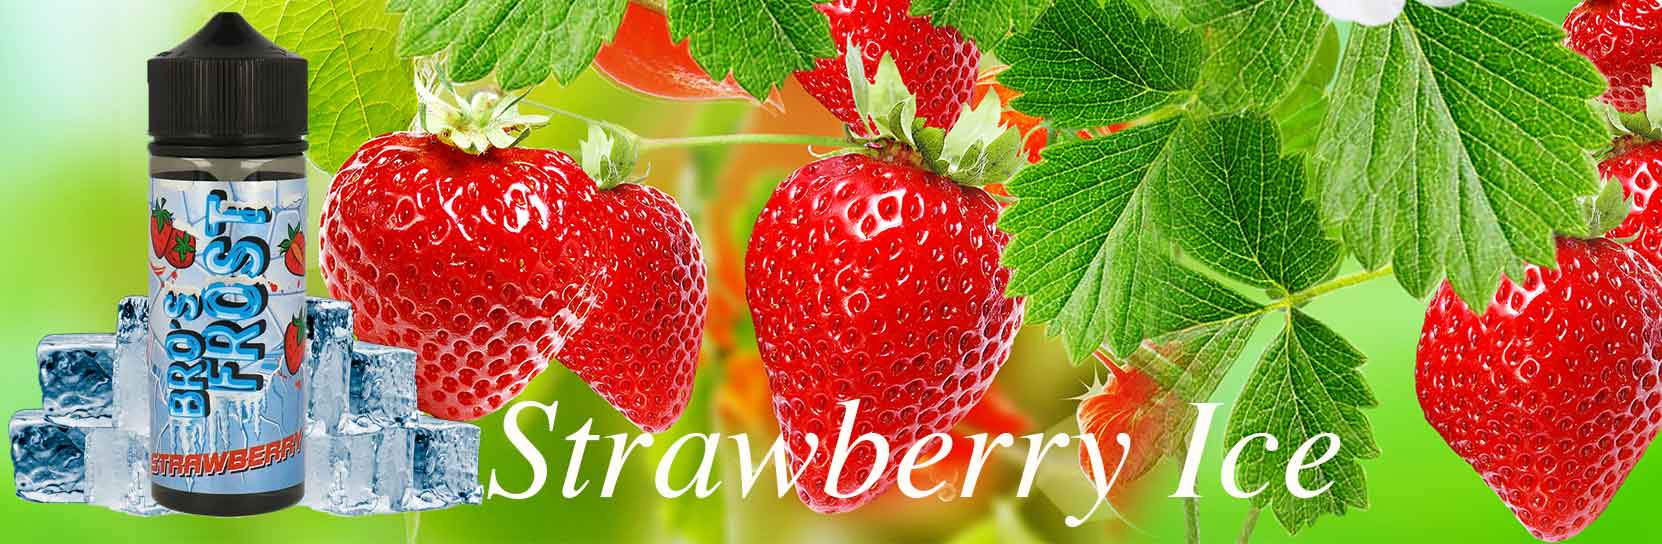 Bro-s-Frost-Strawberry-Banner